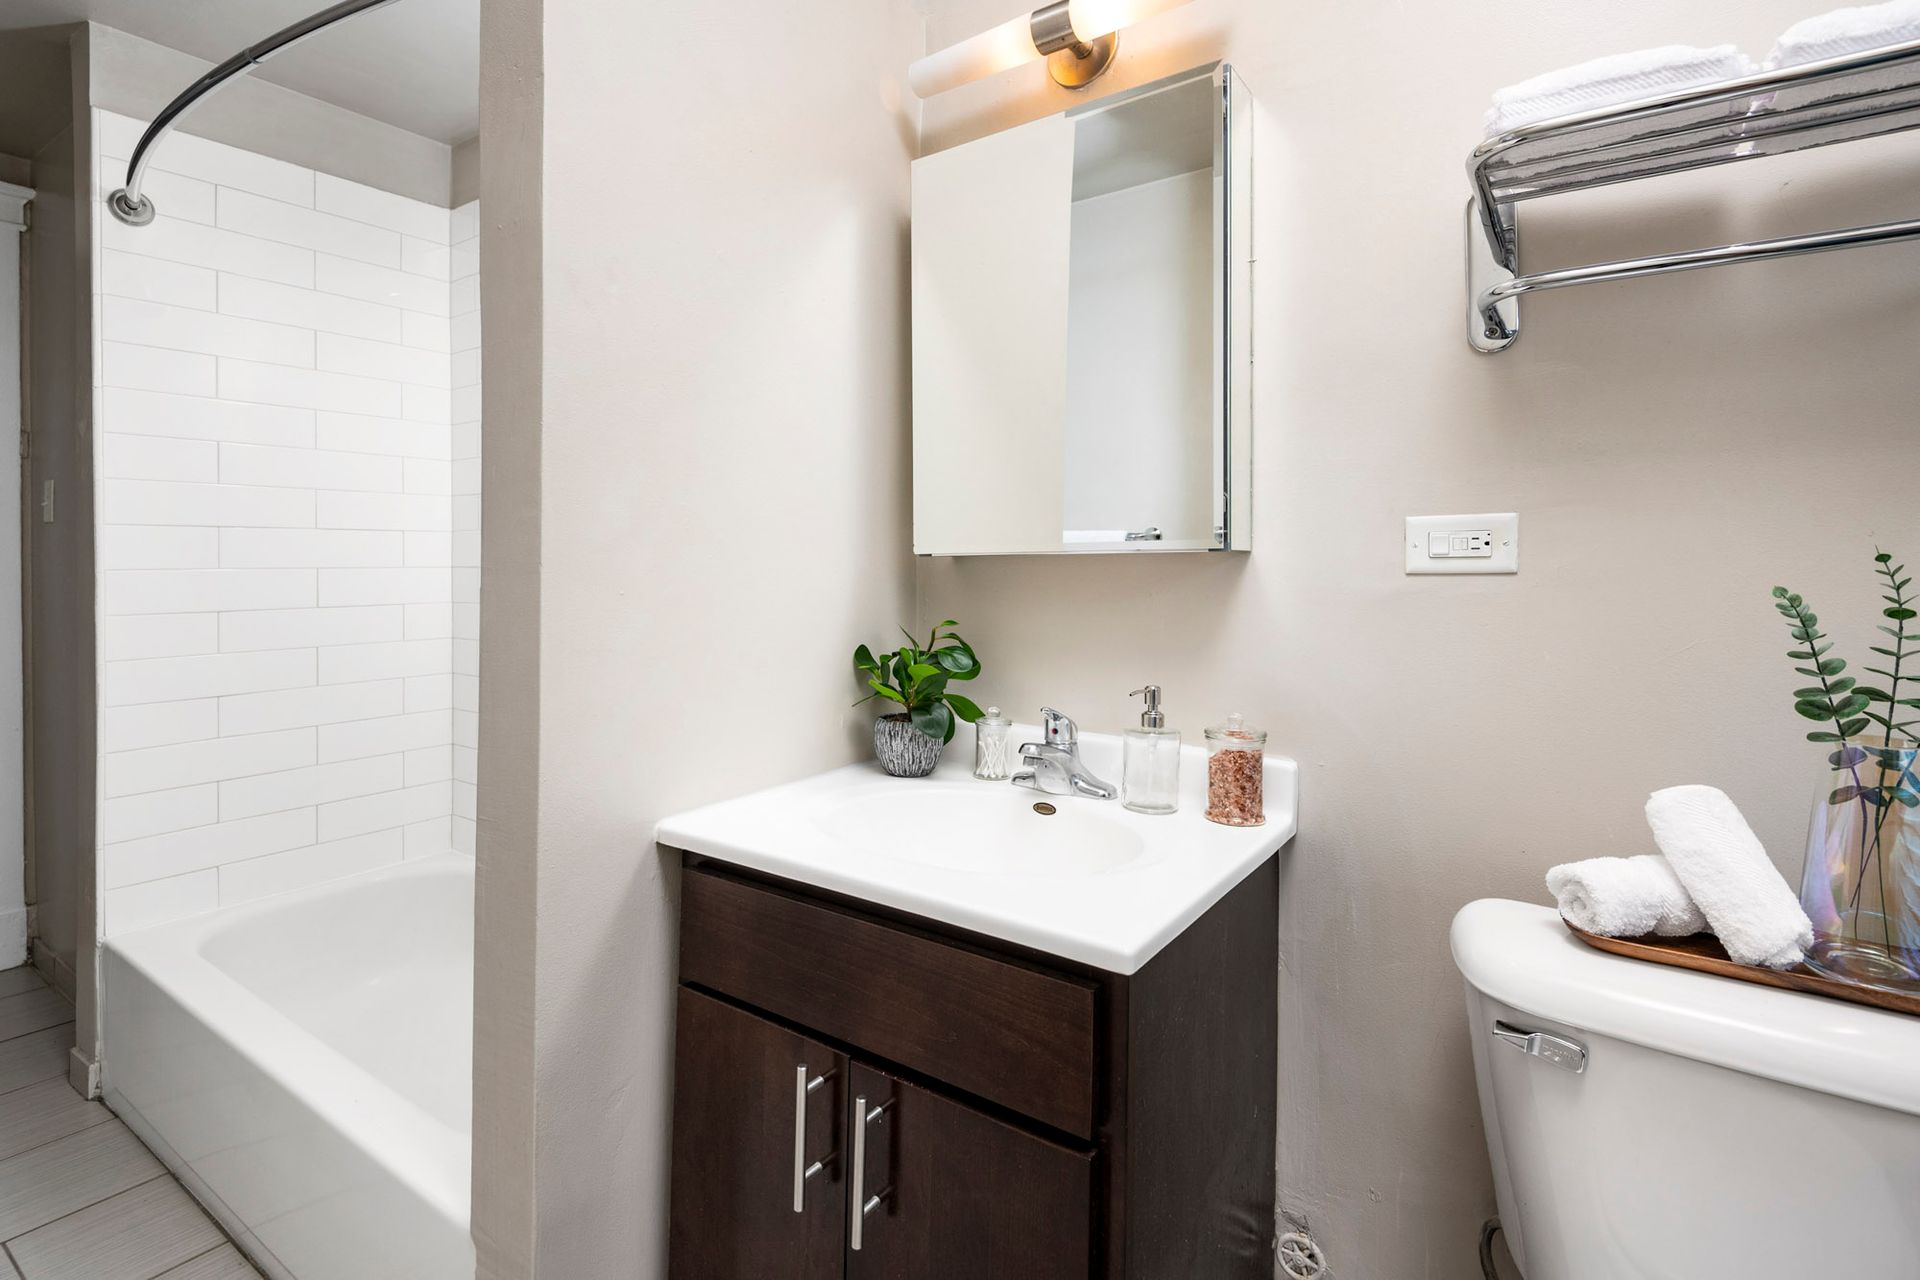 A bathroom with a sink, toilet, bathtub, and mirror at Reside on Irving Park.